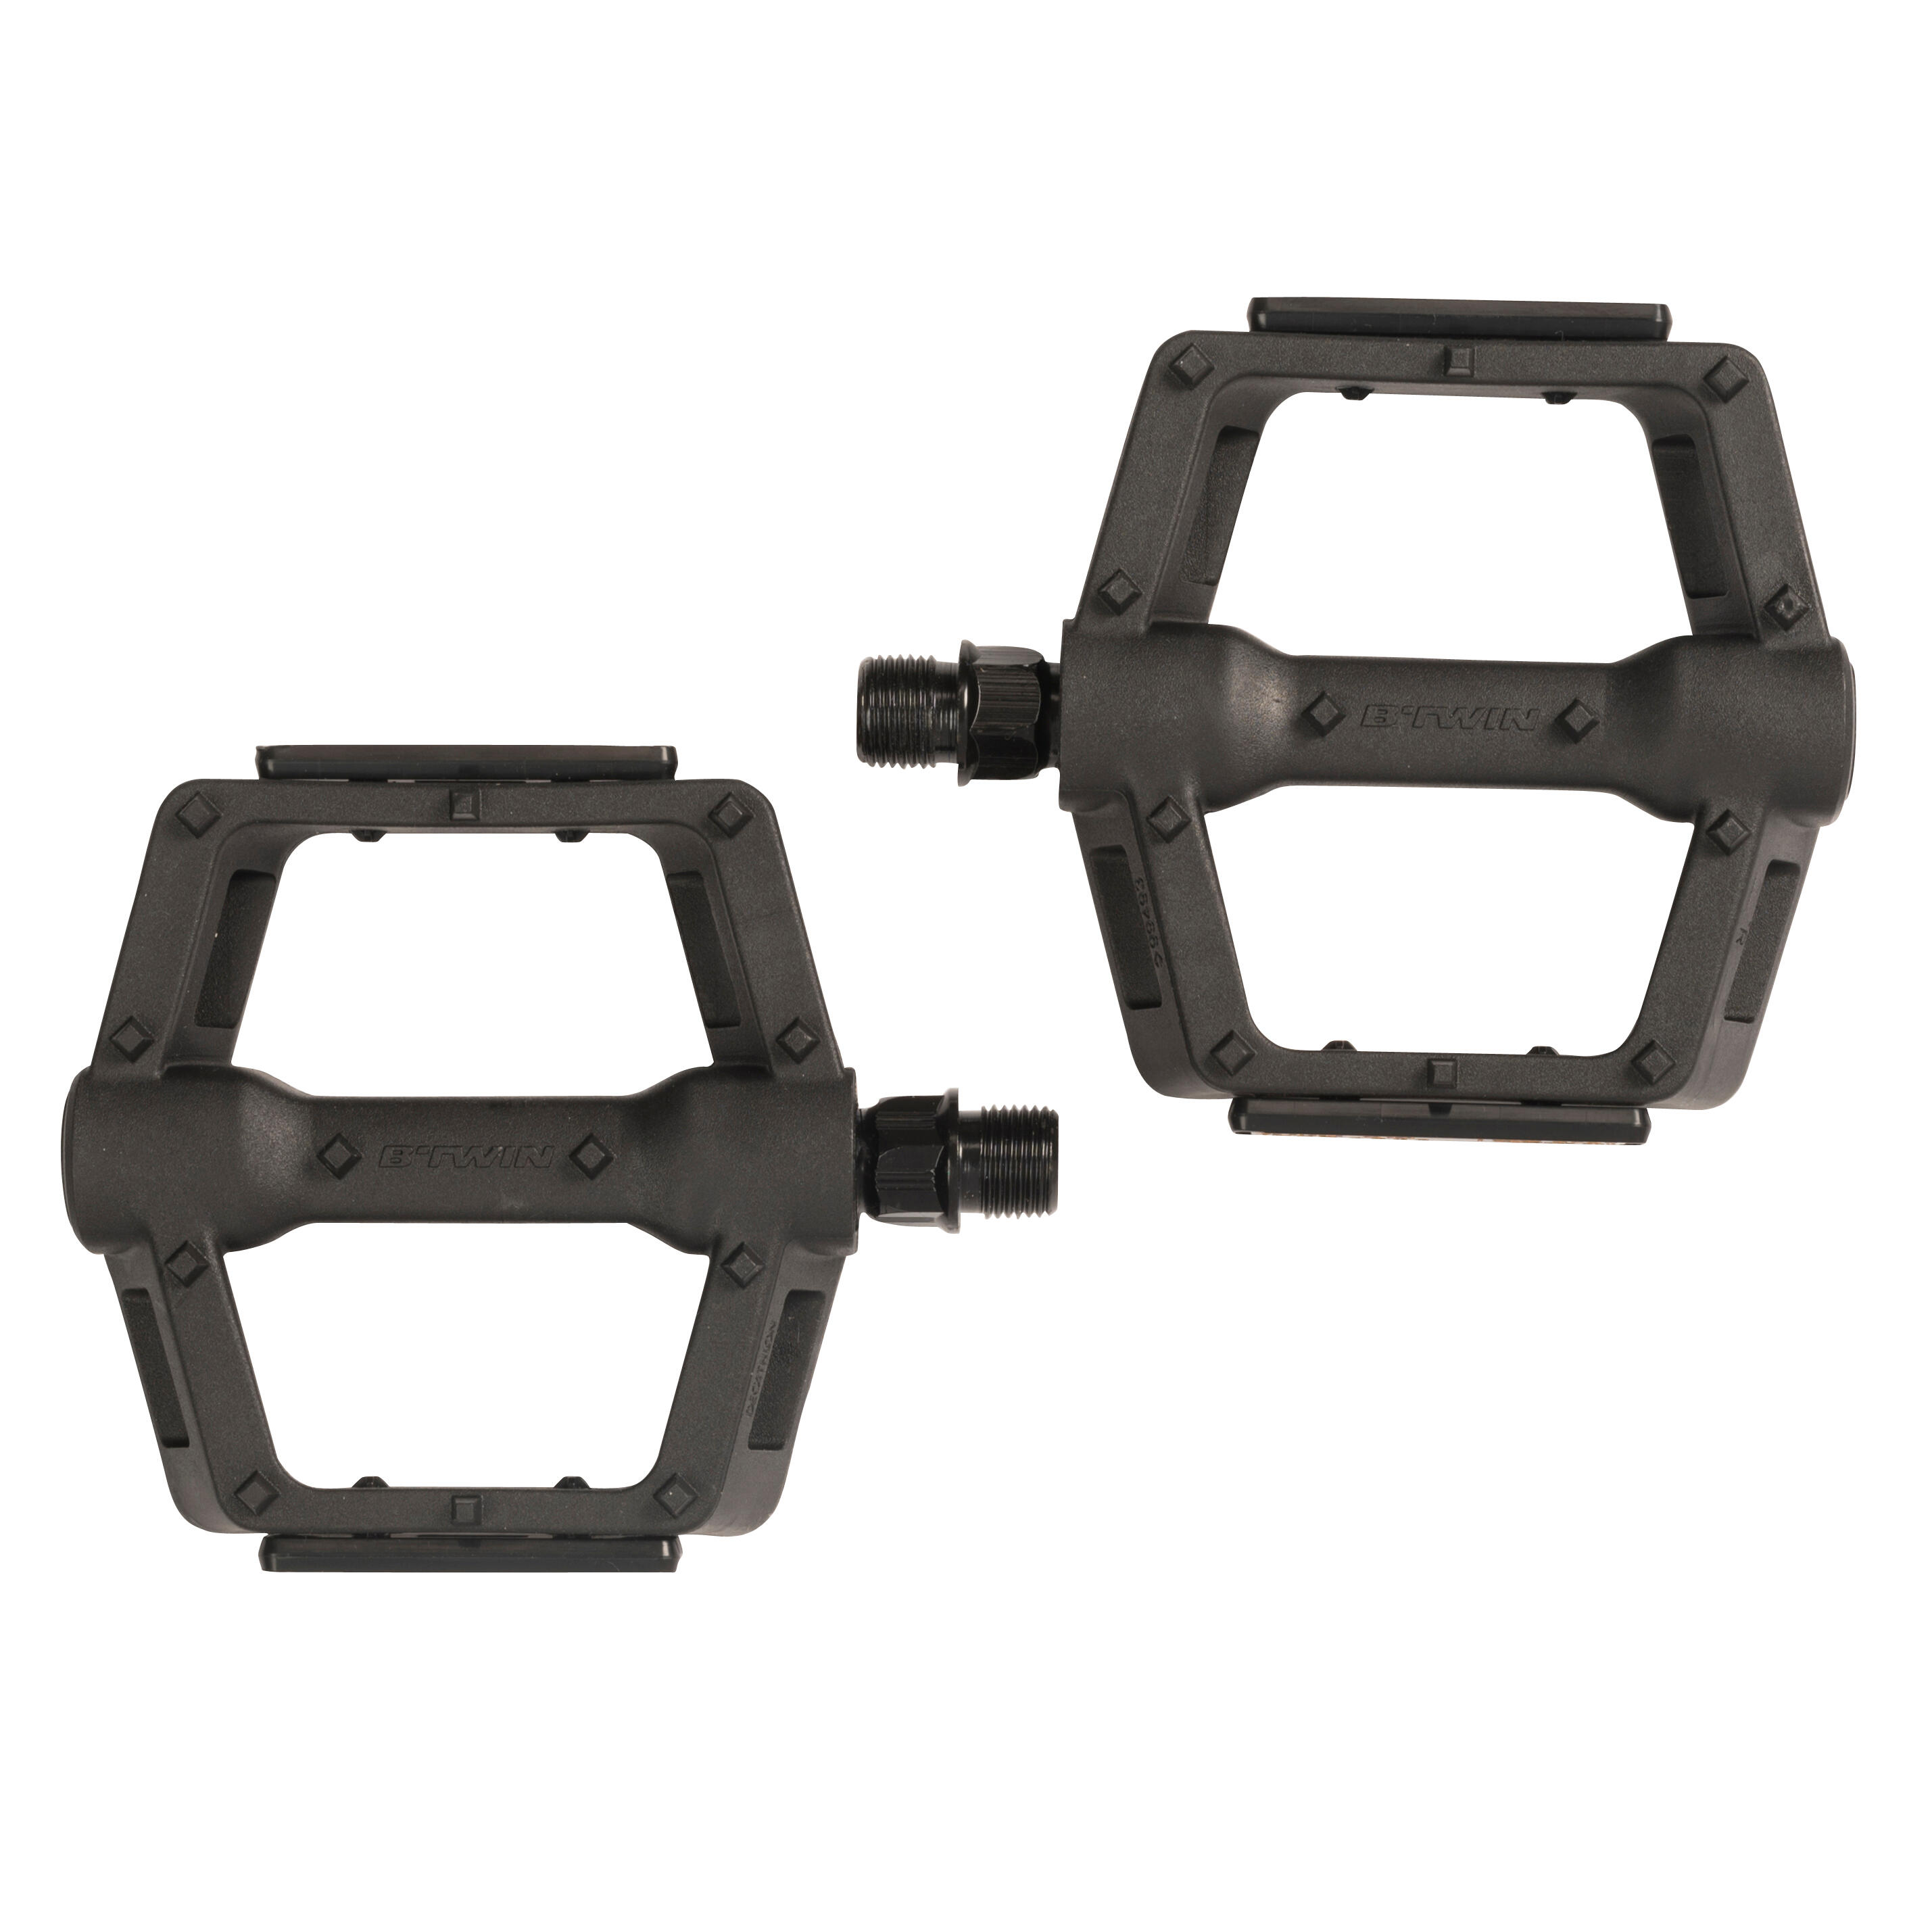 types of mtb pedals